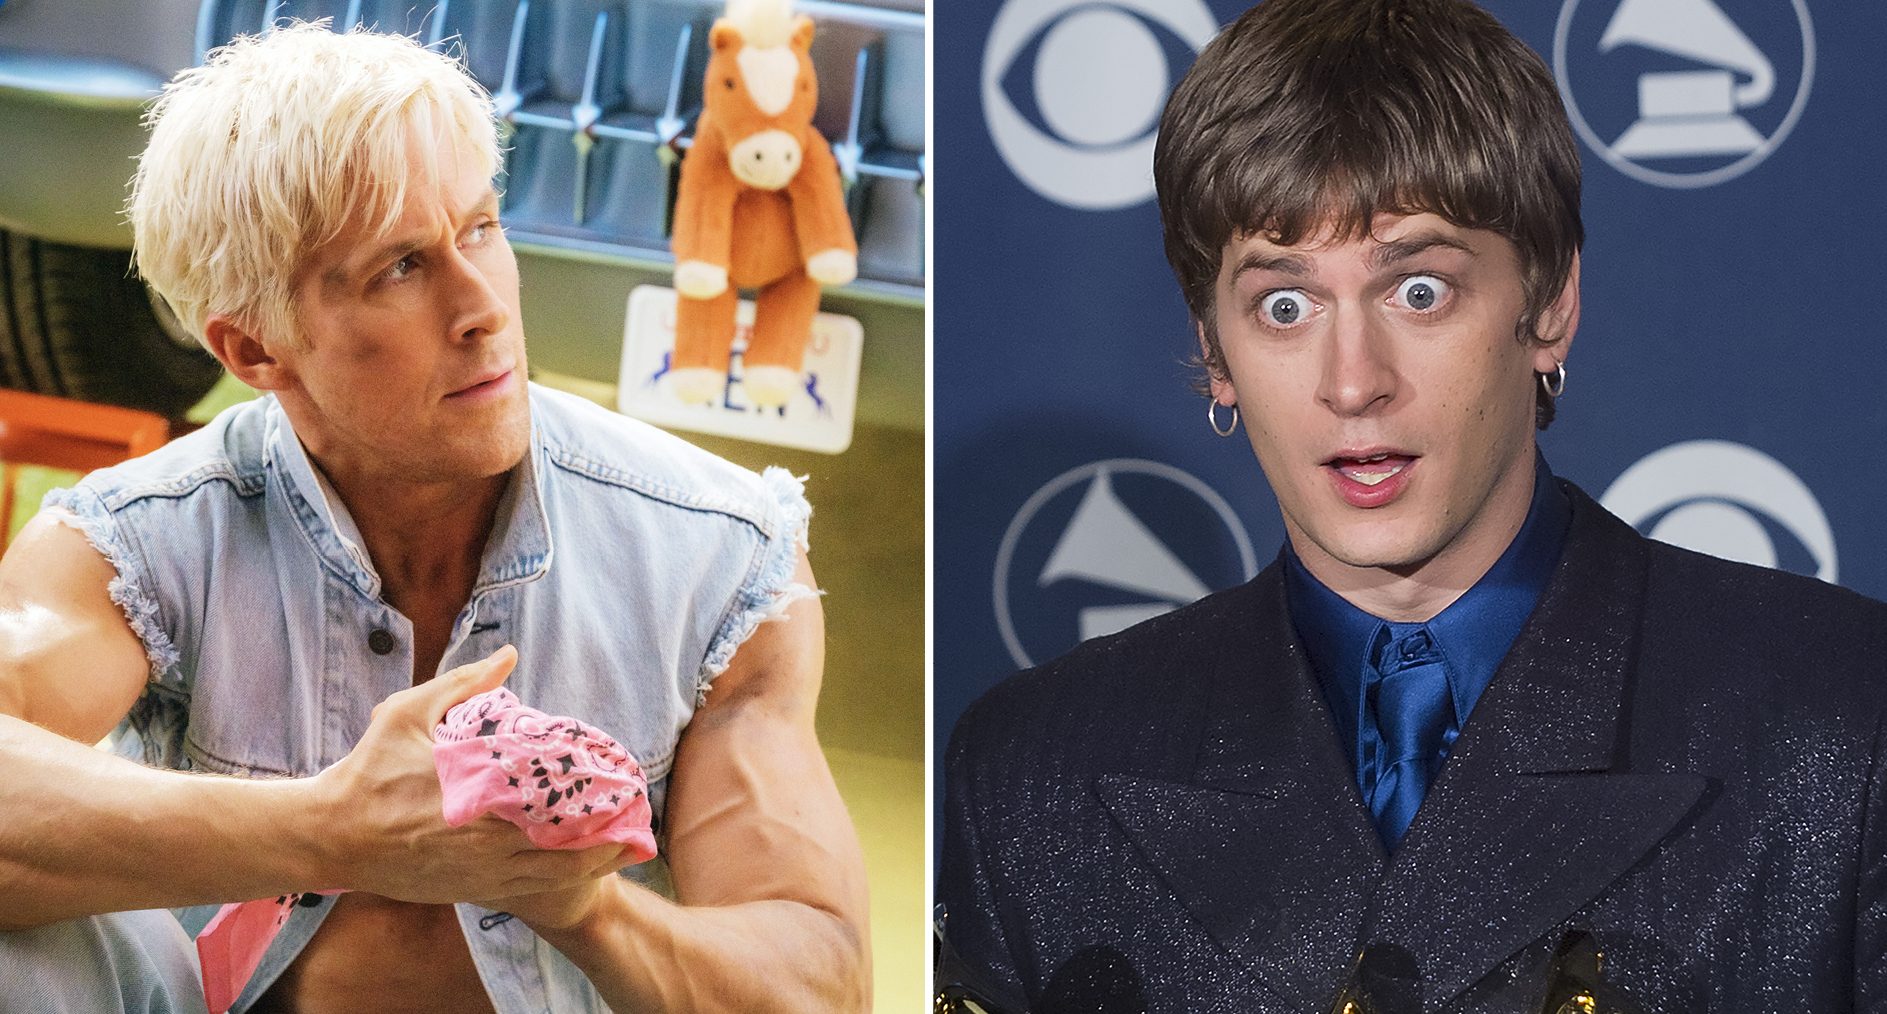 Ryan Gosling as Ken in "Barbie" and an earring-adorned Rob Thomas looking shocked by the number of Grammys he's collected